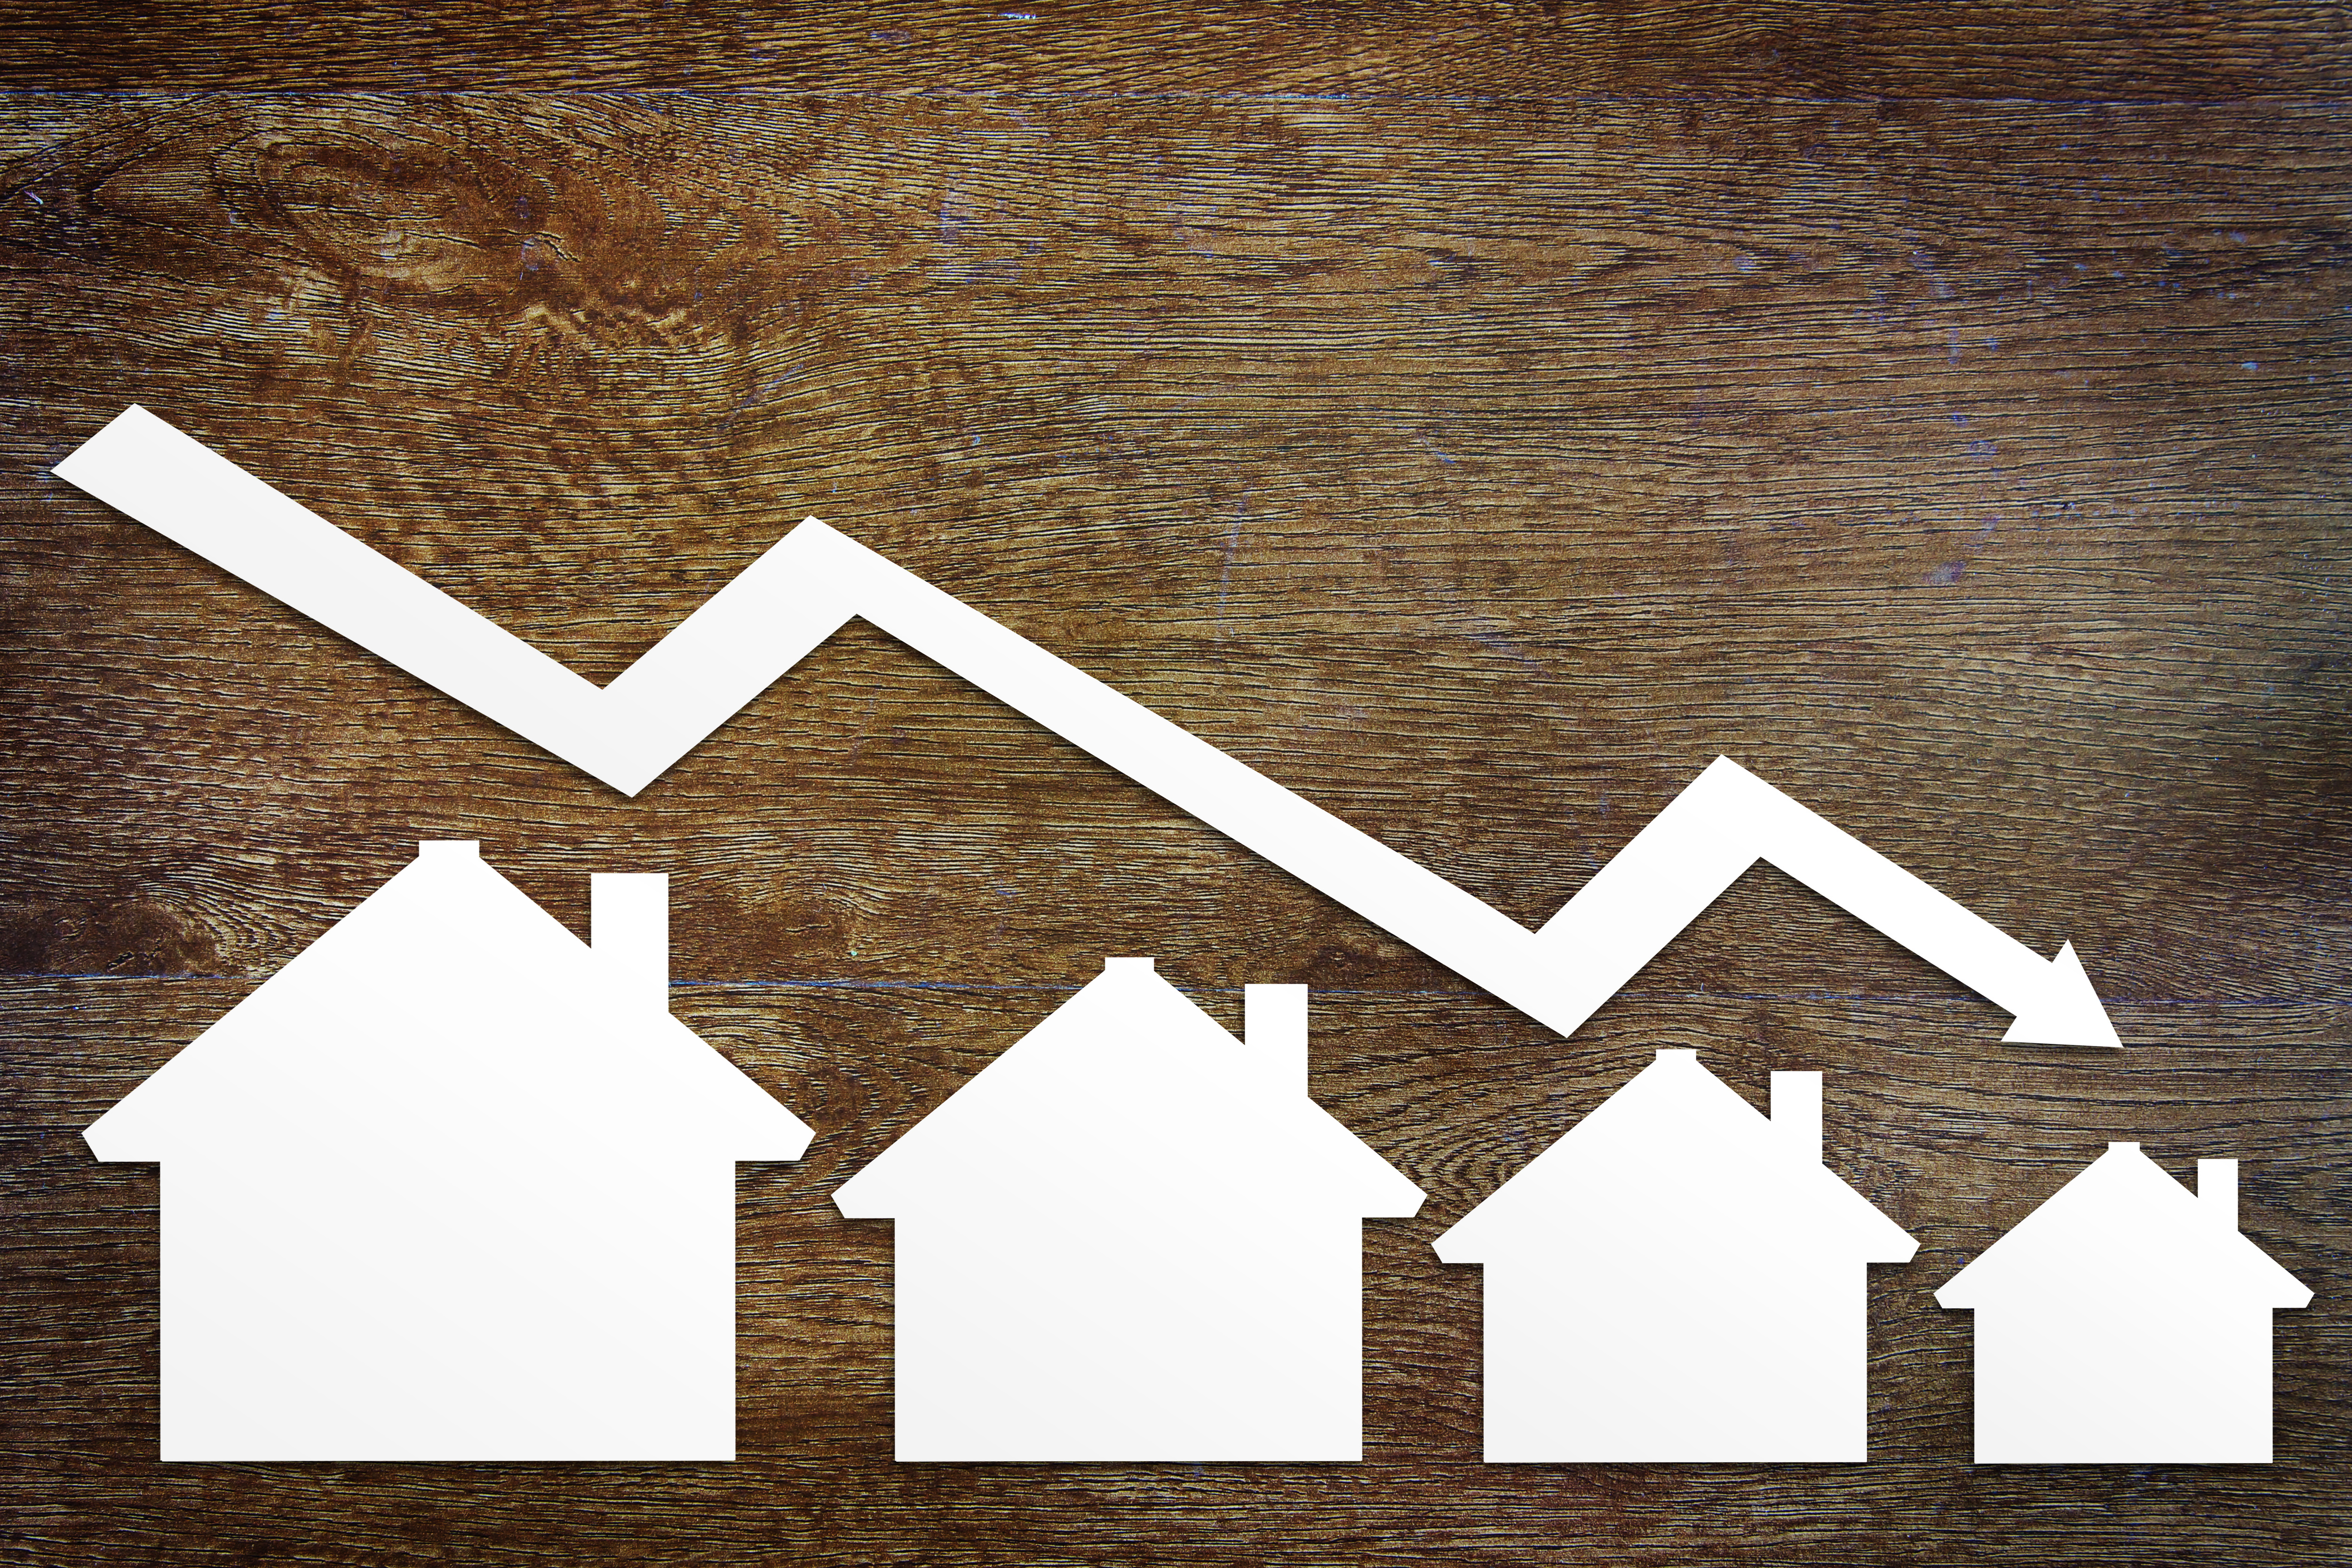 Annual house price growth at lowest rate since July 2013